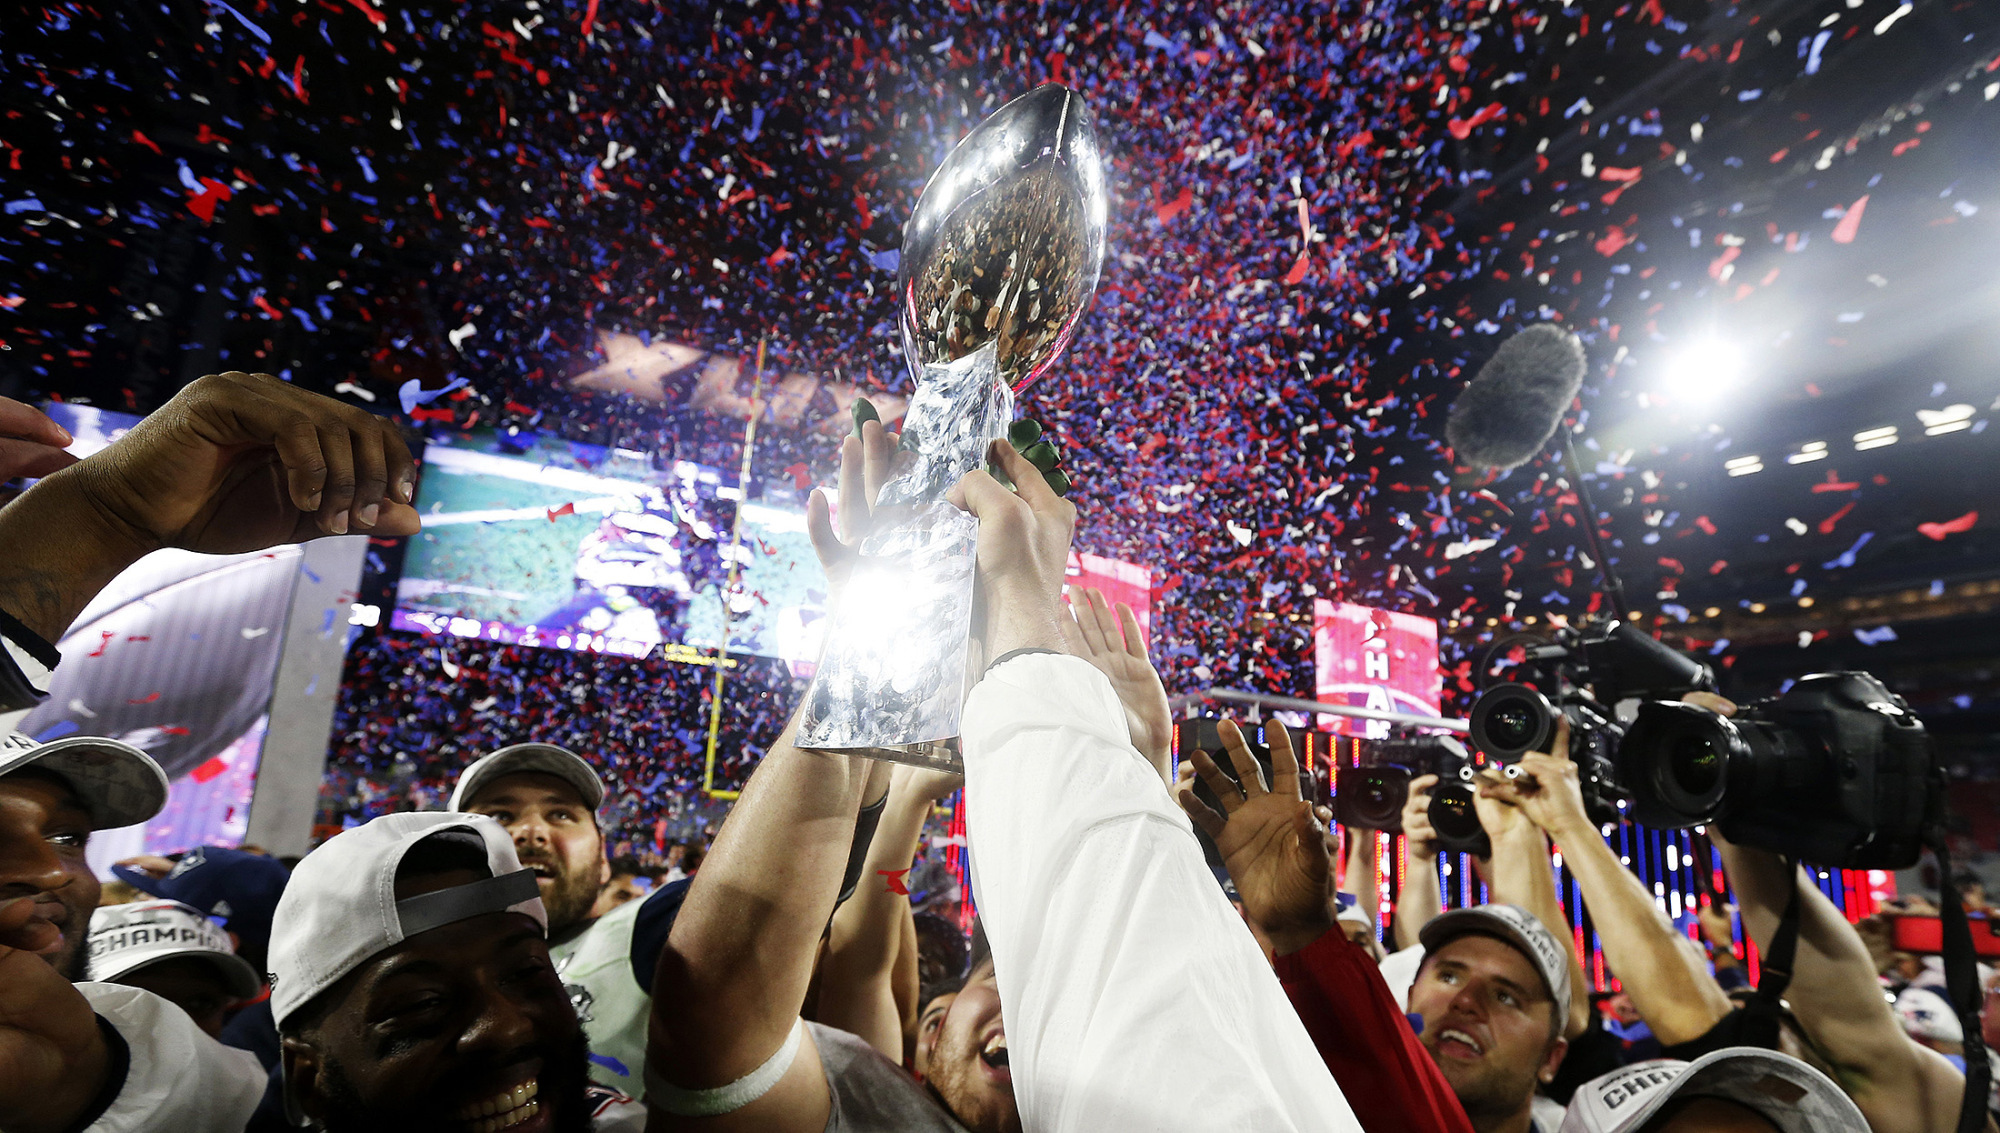 Members of the New England Patriots celebrate with the Vince Lombardi Trophy after defeating the Seattle Seahawks in Super Bowl XLIX in Glendale, Arizona, on Feb. 1, 2015.
